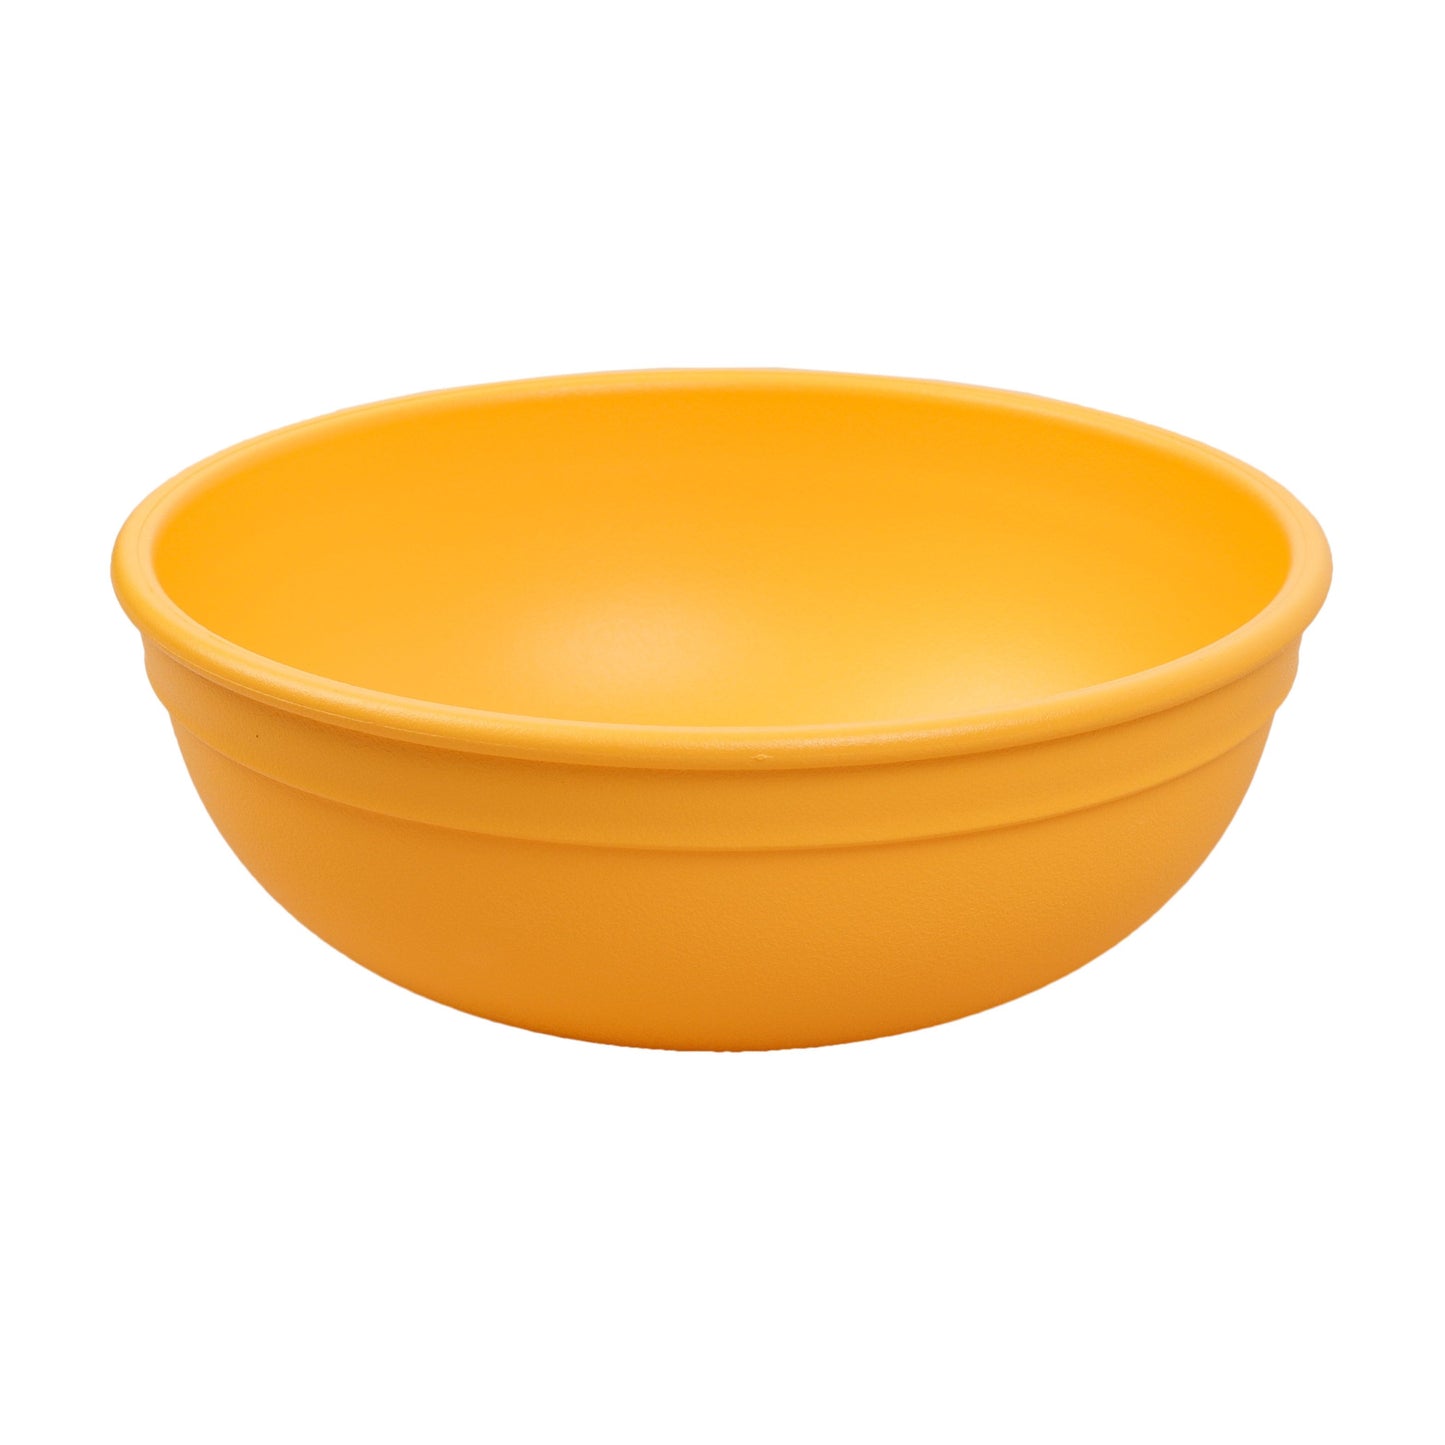 Replay Large Bowl - Sunny Yellow